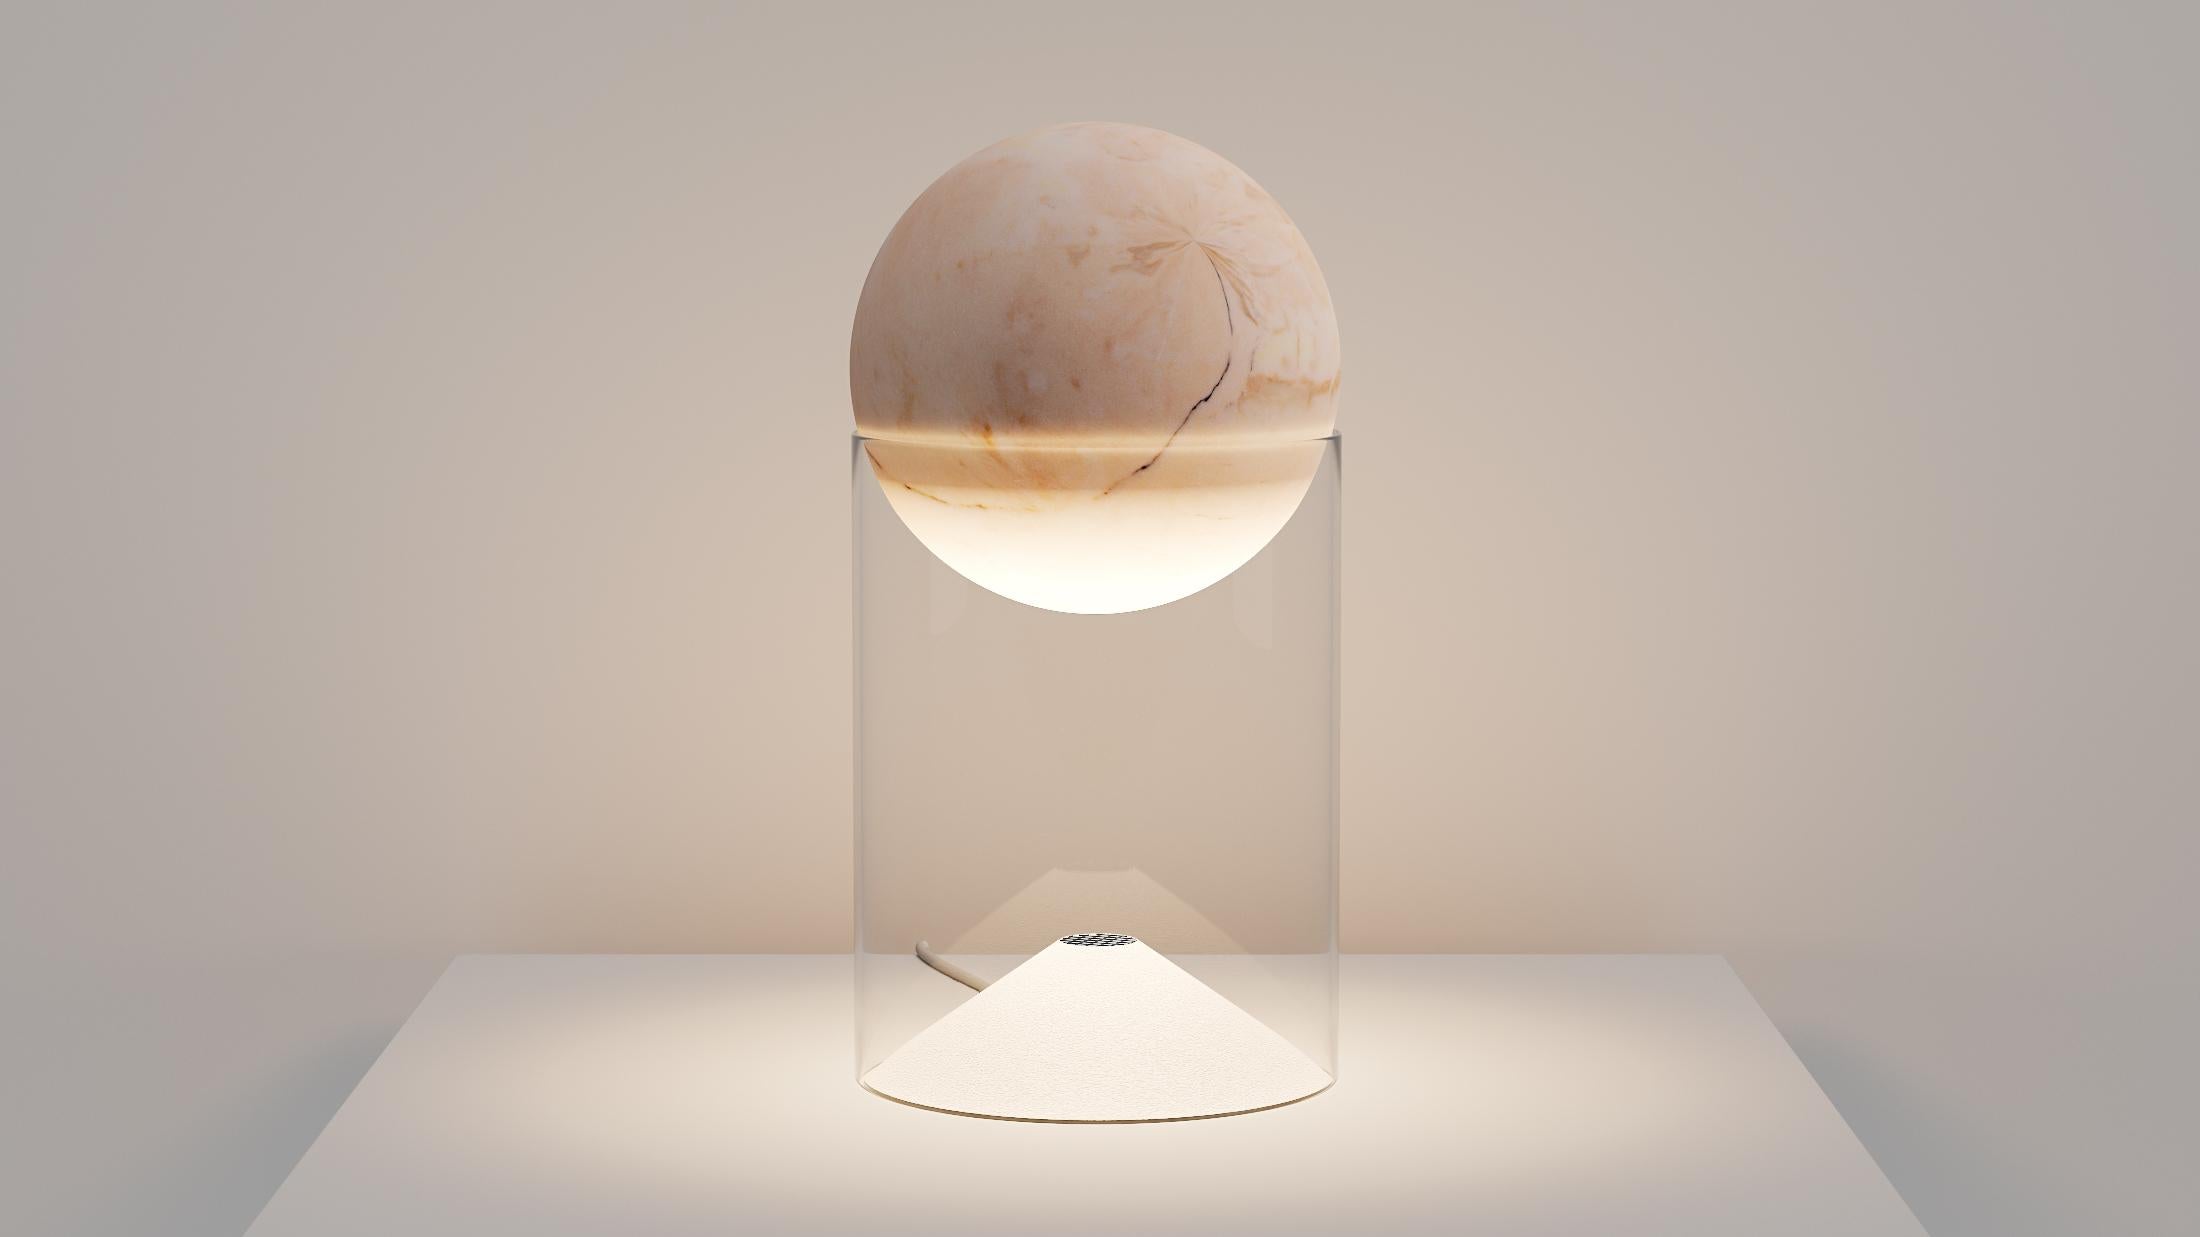 Lunar 15 table lamp by Studio Roso
Dimensions: D15 x H29.5 cm
Material: Stone (marble or sandstone), glass
Weight: 3.5 kg 

All our lamps can be wired according to each country. If sold to the USA it will be wired for the USA for